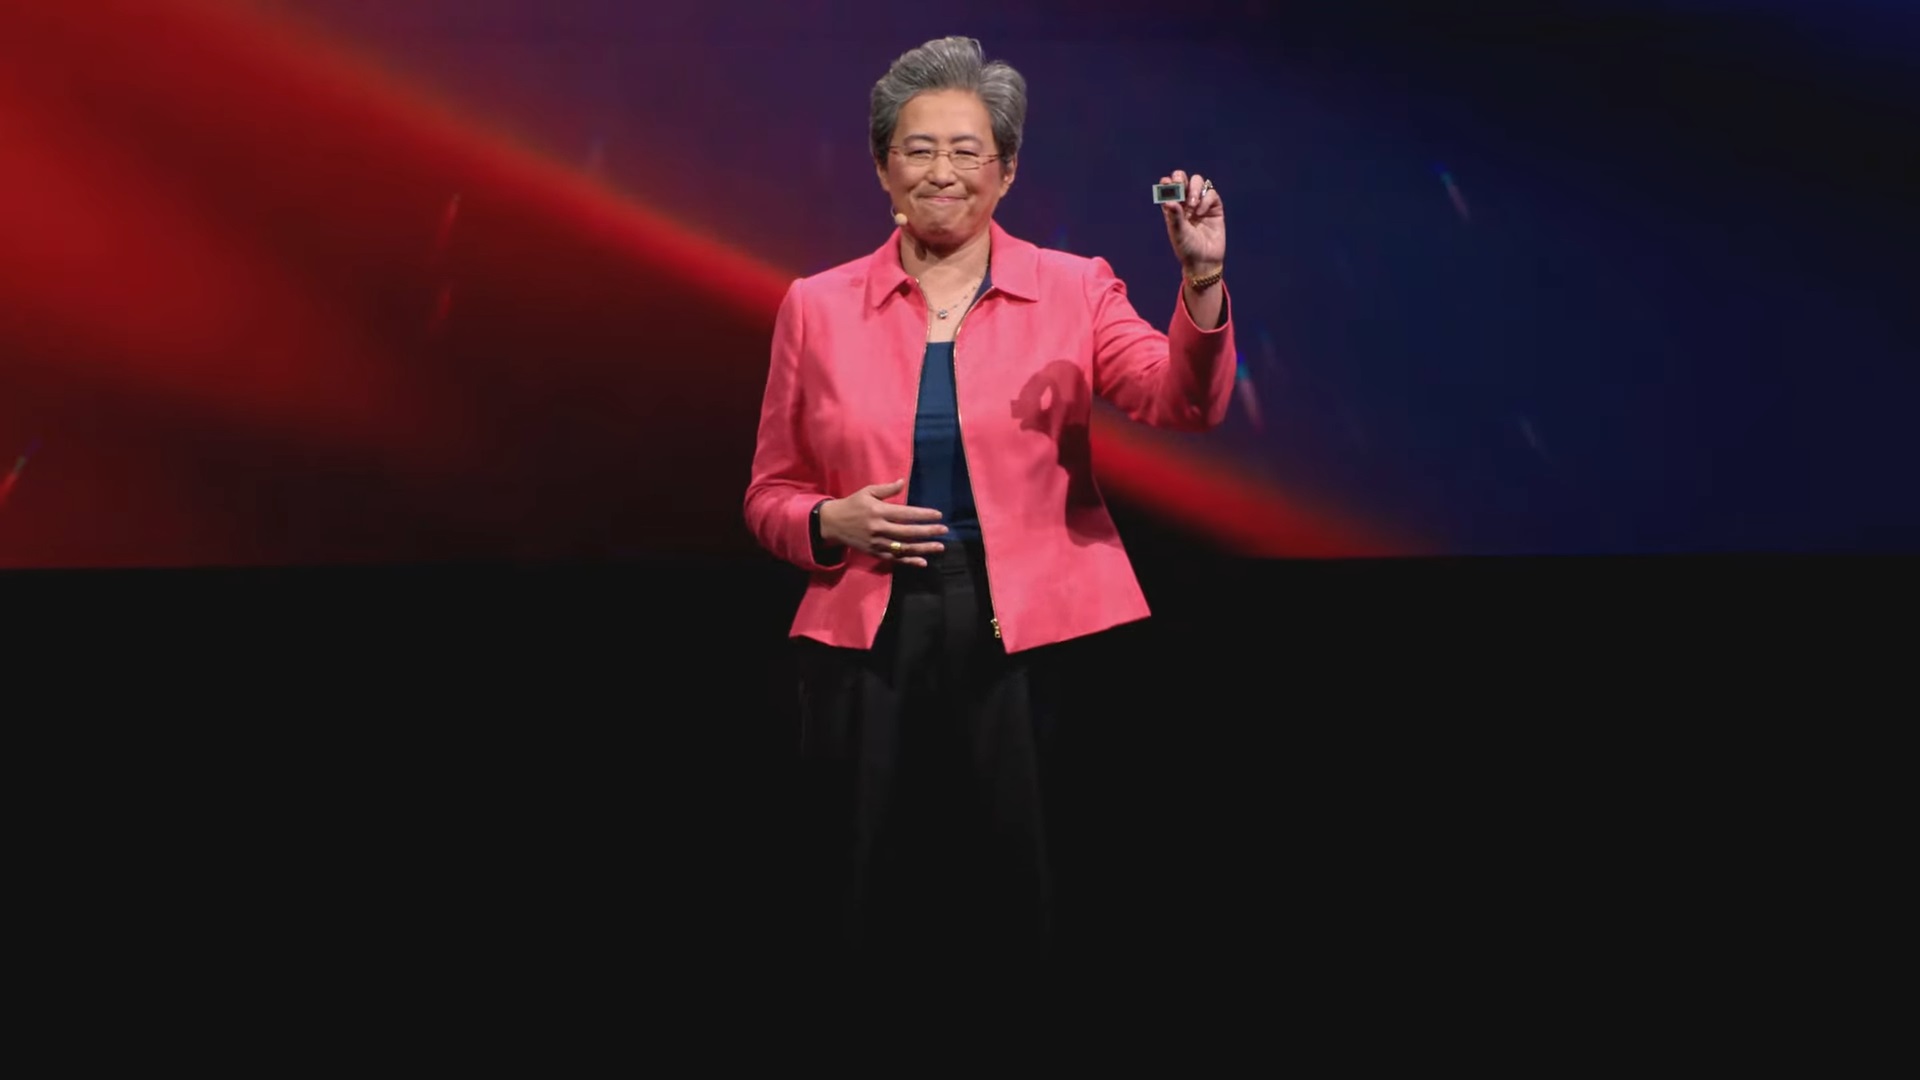 AMD's CEO presenting the chip for Ryzen AI.